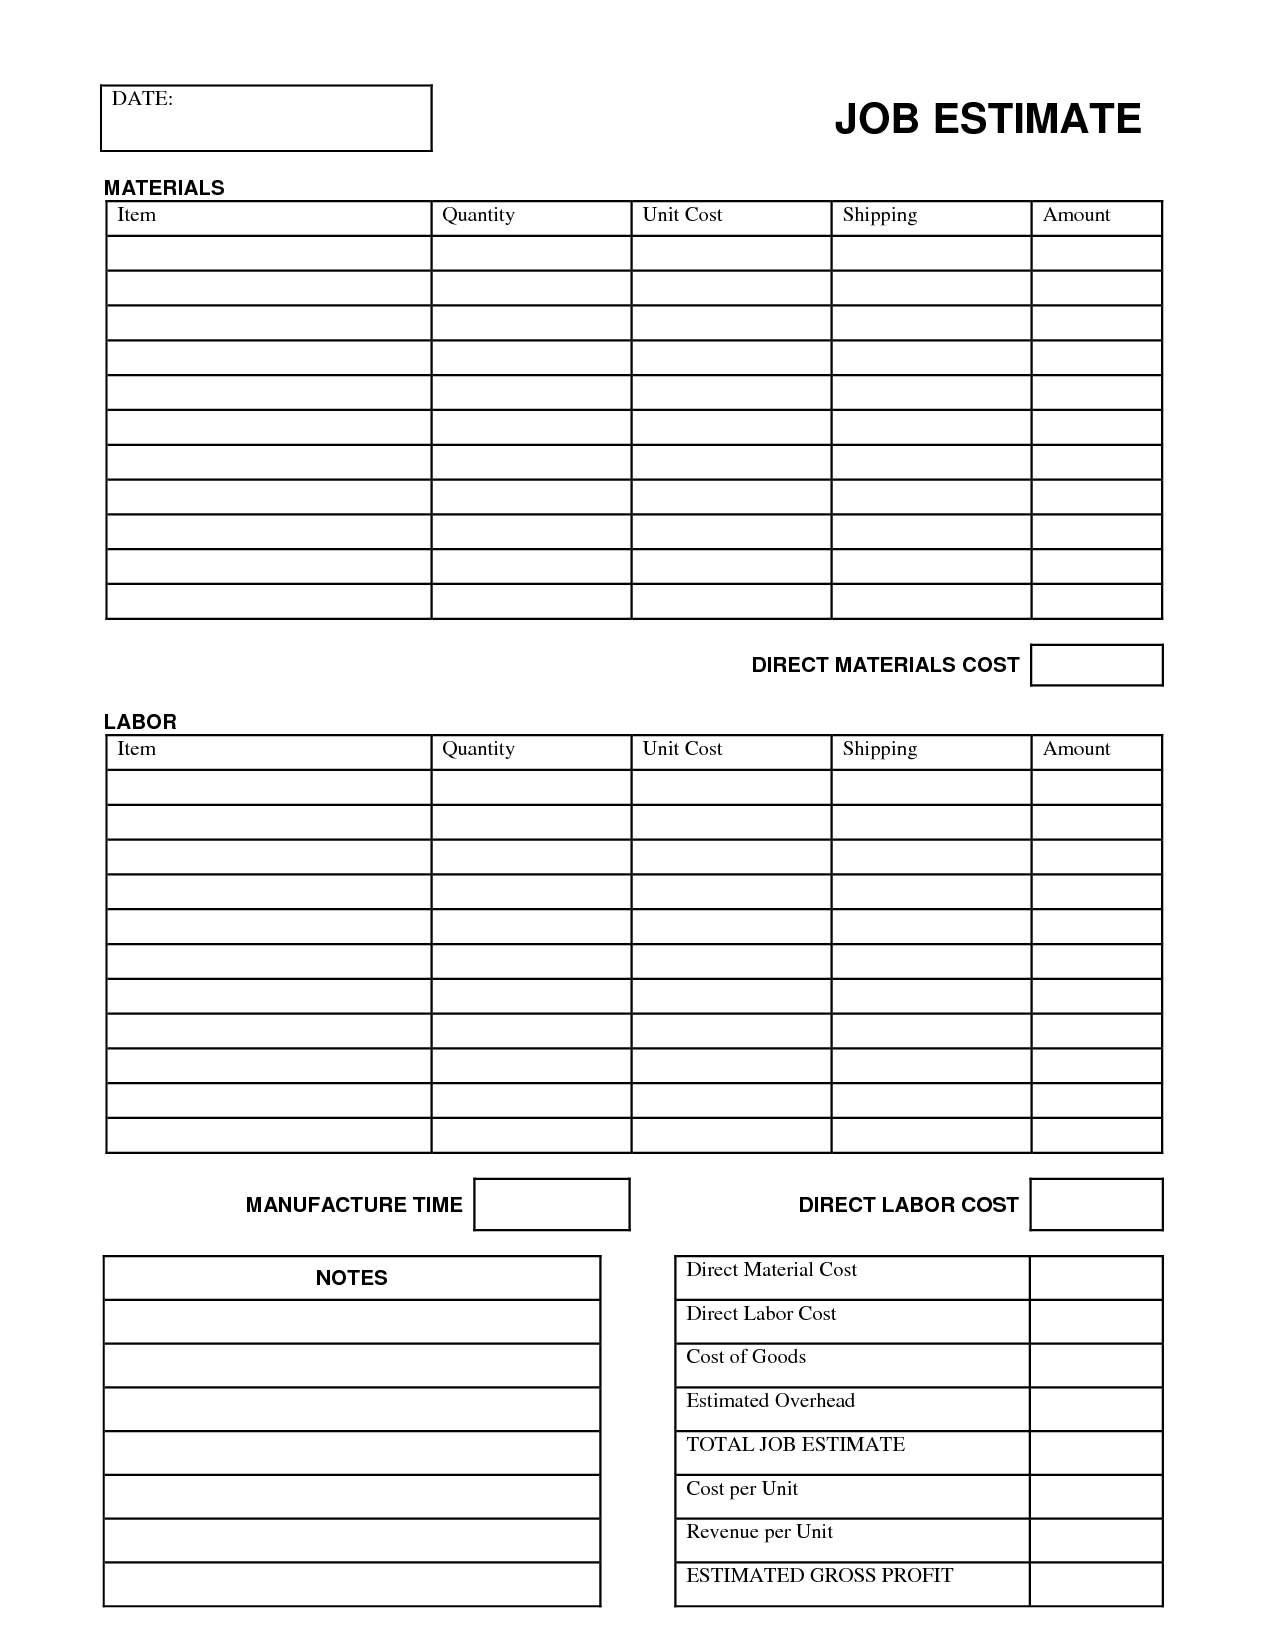 7-best-images-of-free-printable-job-estimate-form-template-free